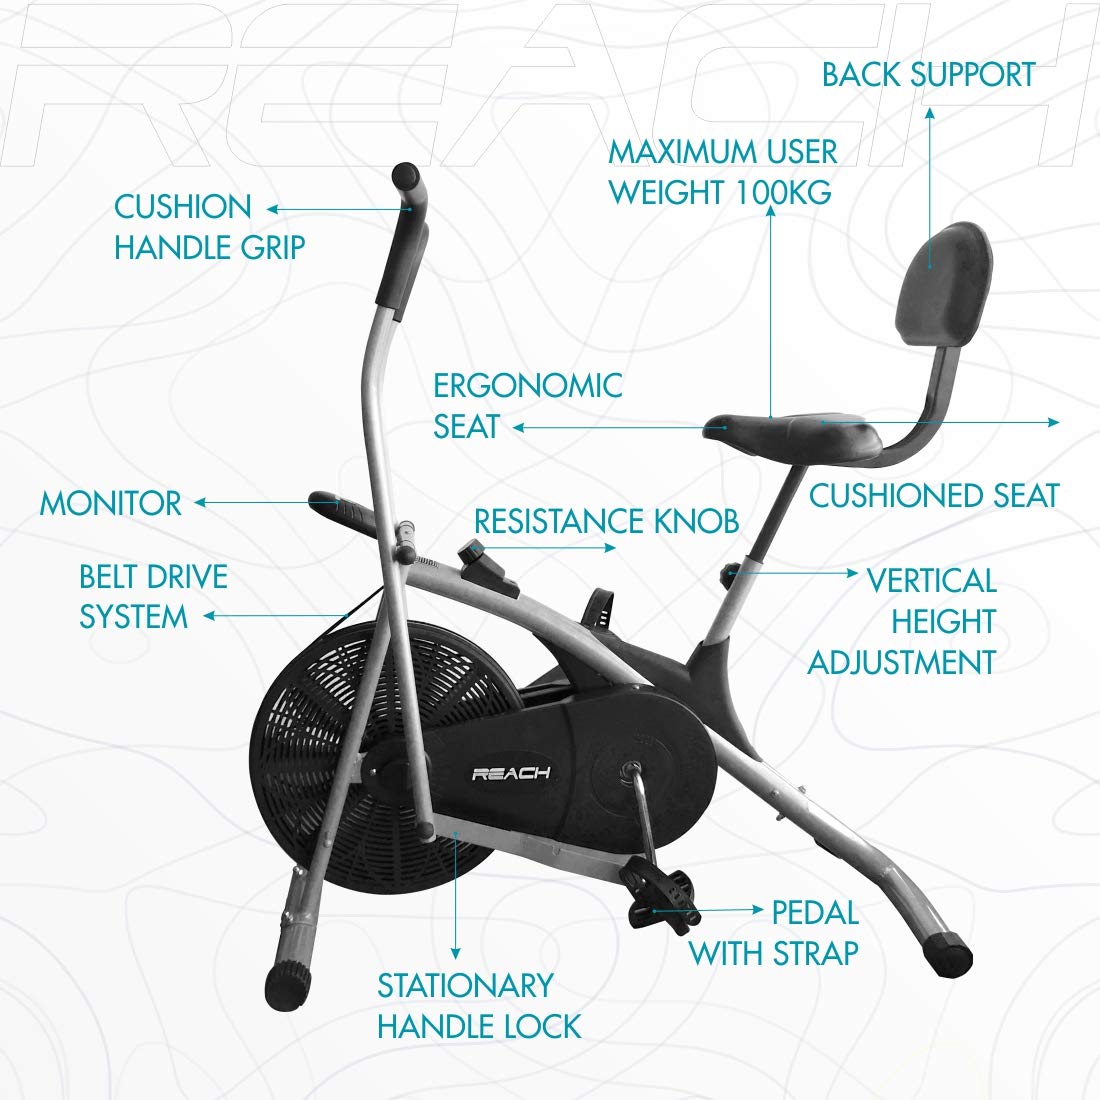 Reach AB-100 Air Bike Exercise Fitness Cycle With Back Support Seat | Perfect Gym Bike with Moving Handle for complete body workout